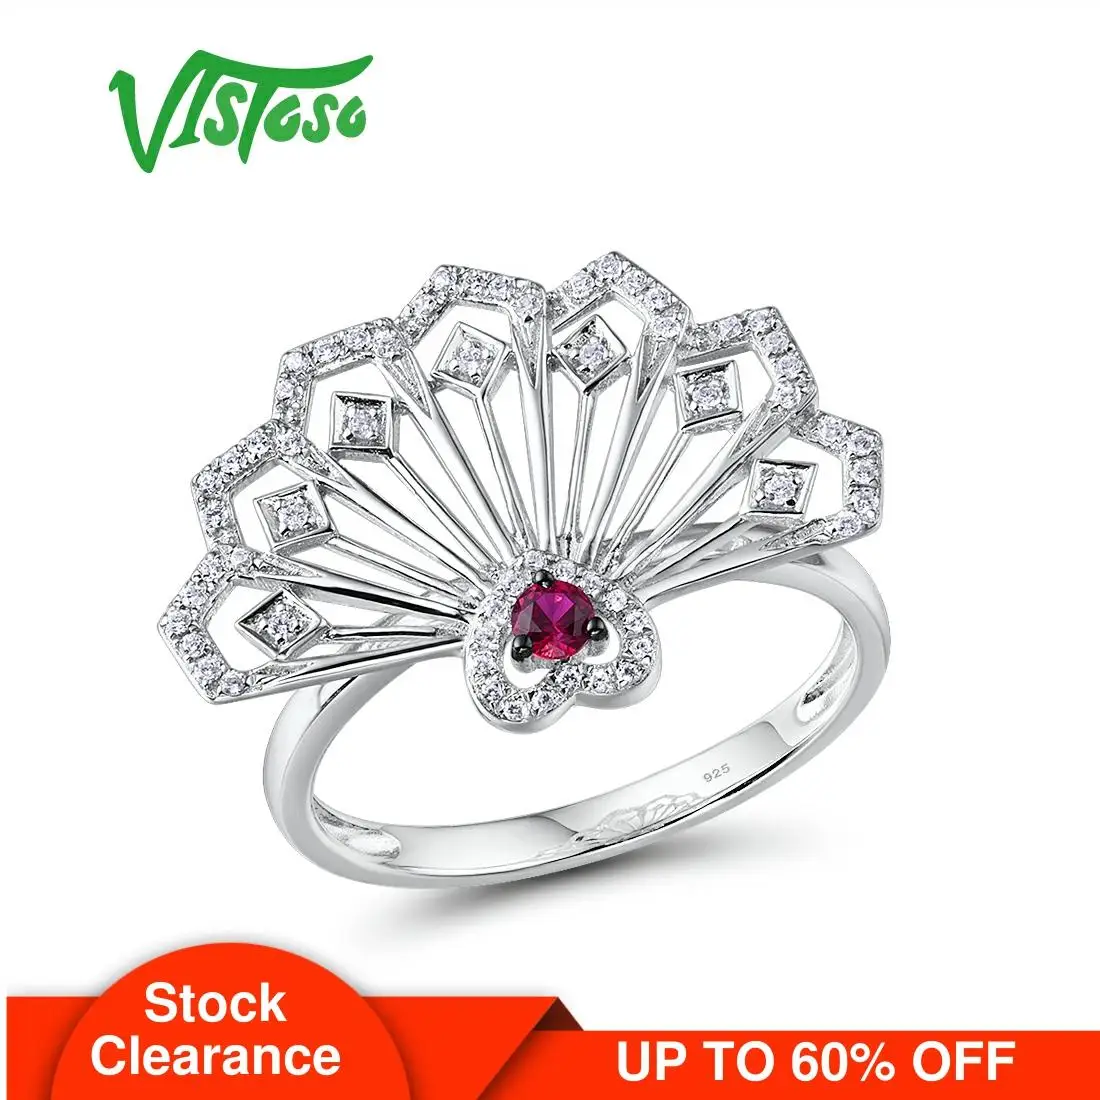 

VISTOSO Gold Rings For Women Genuine 14K 585 White Gold Ring Fancy Ruby Sparkling Diamond Engagement Anniversary Fine Jewelry